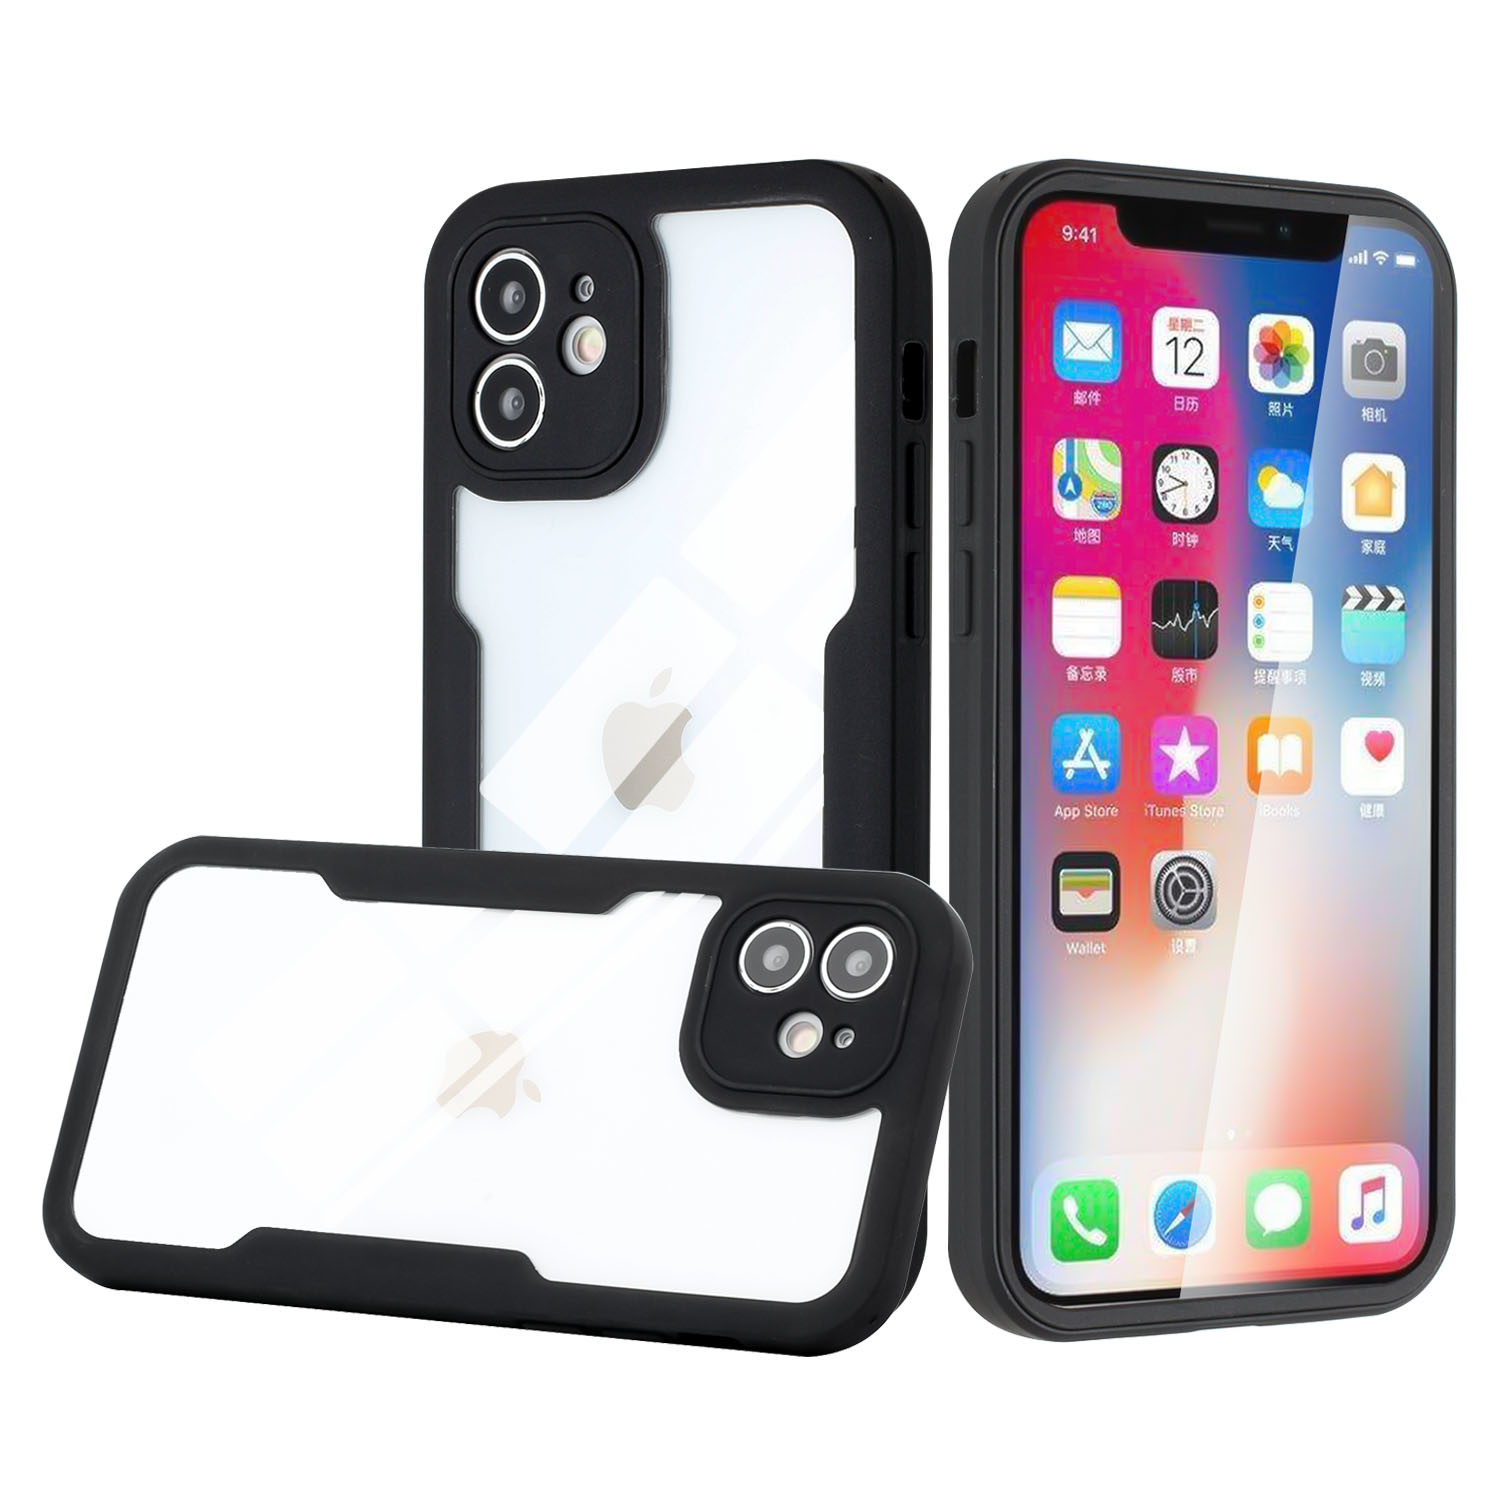 For Apple iPhone XR Transparent Slim Hybrid with PET Screen Protector Case Cover